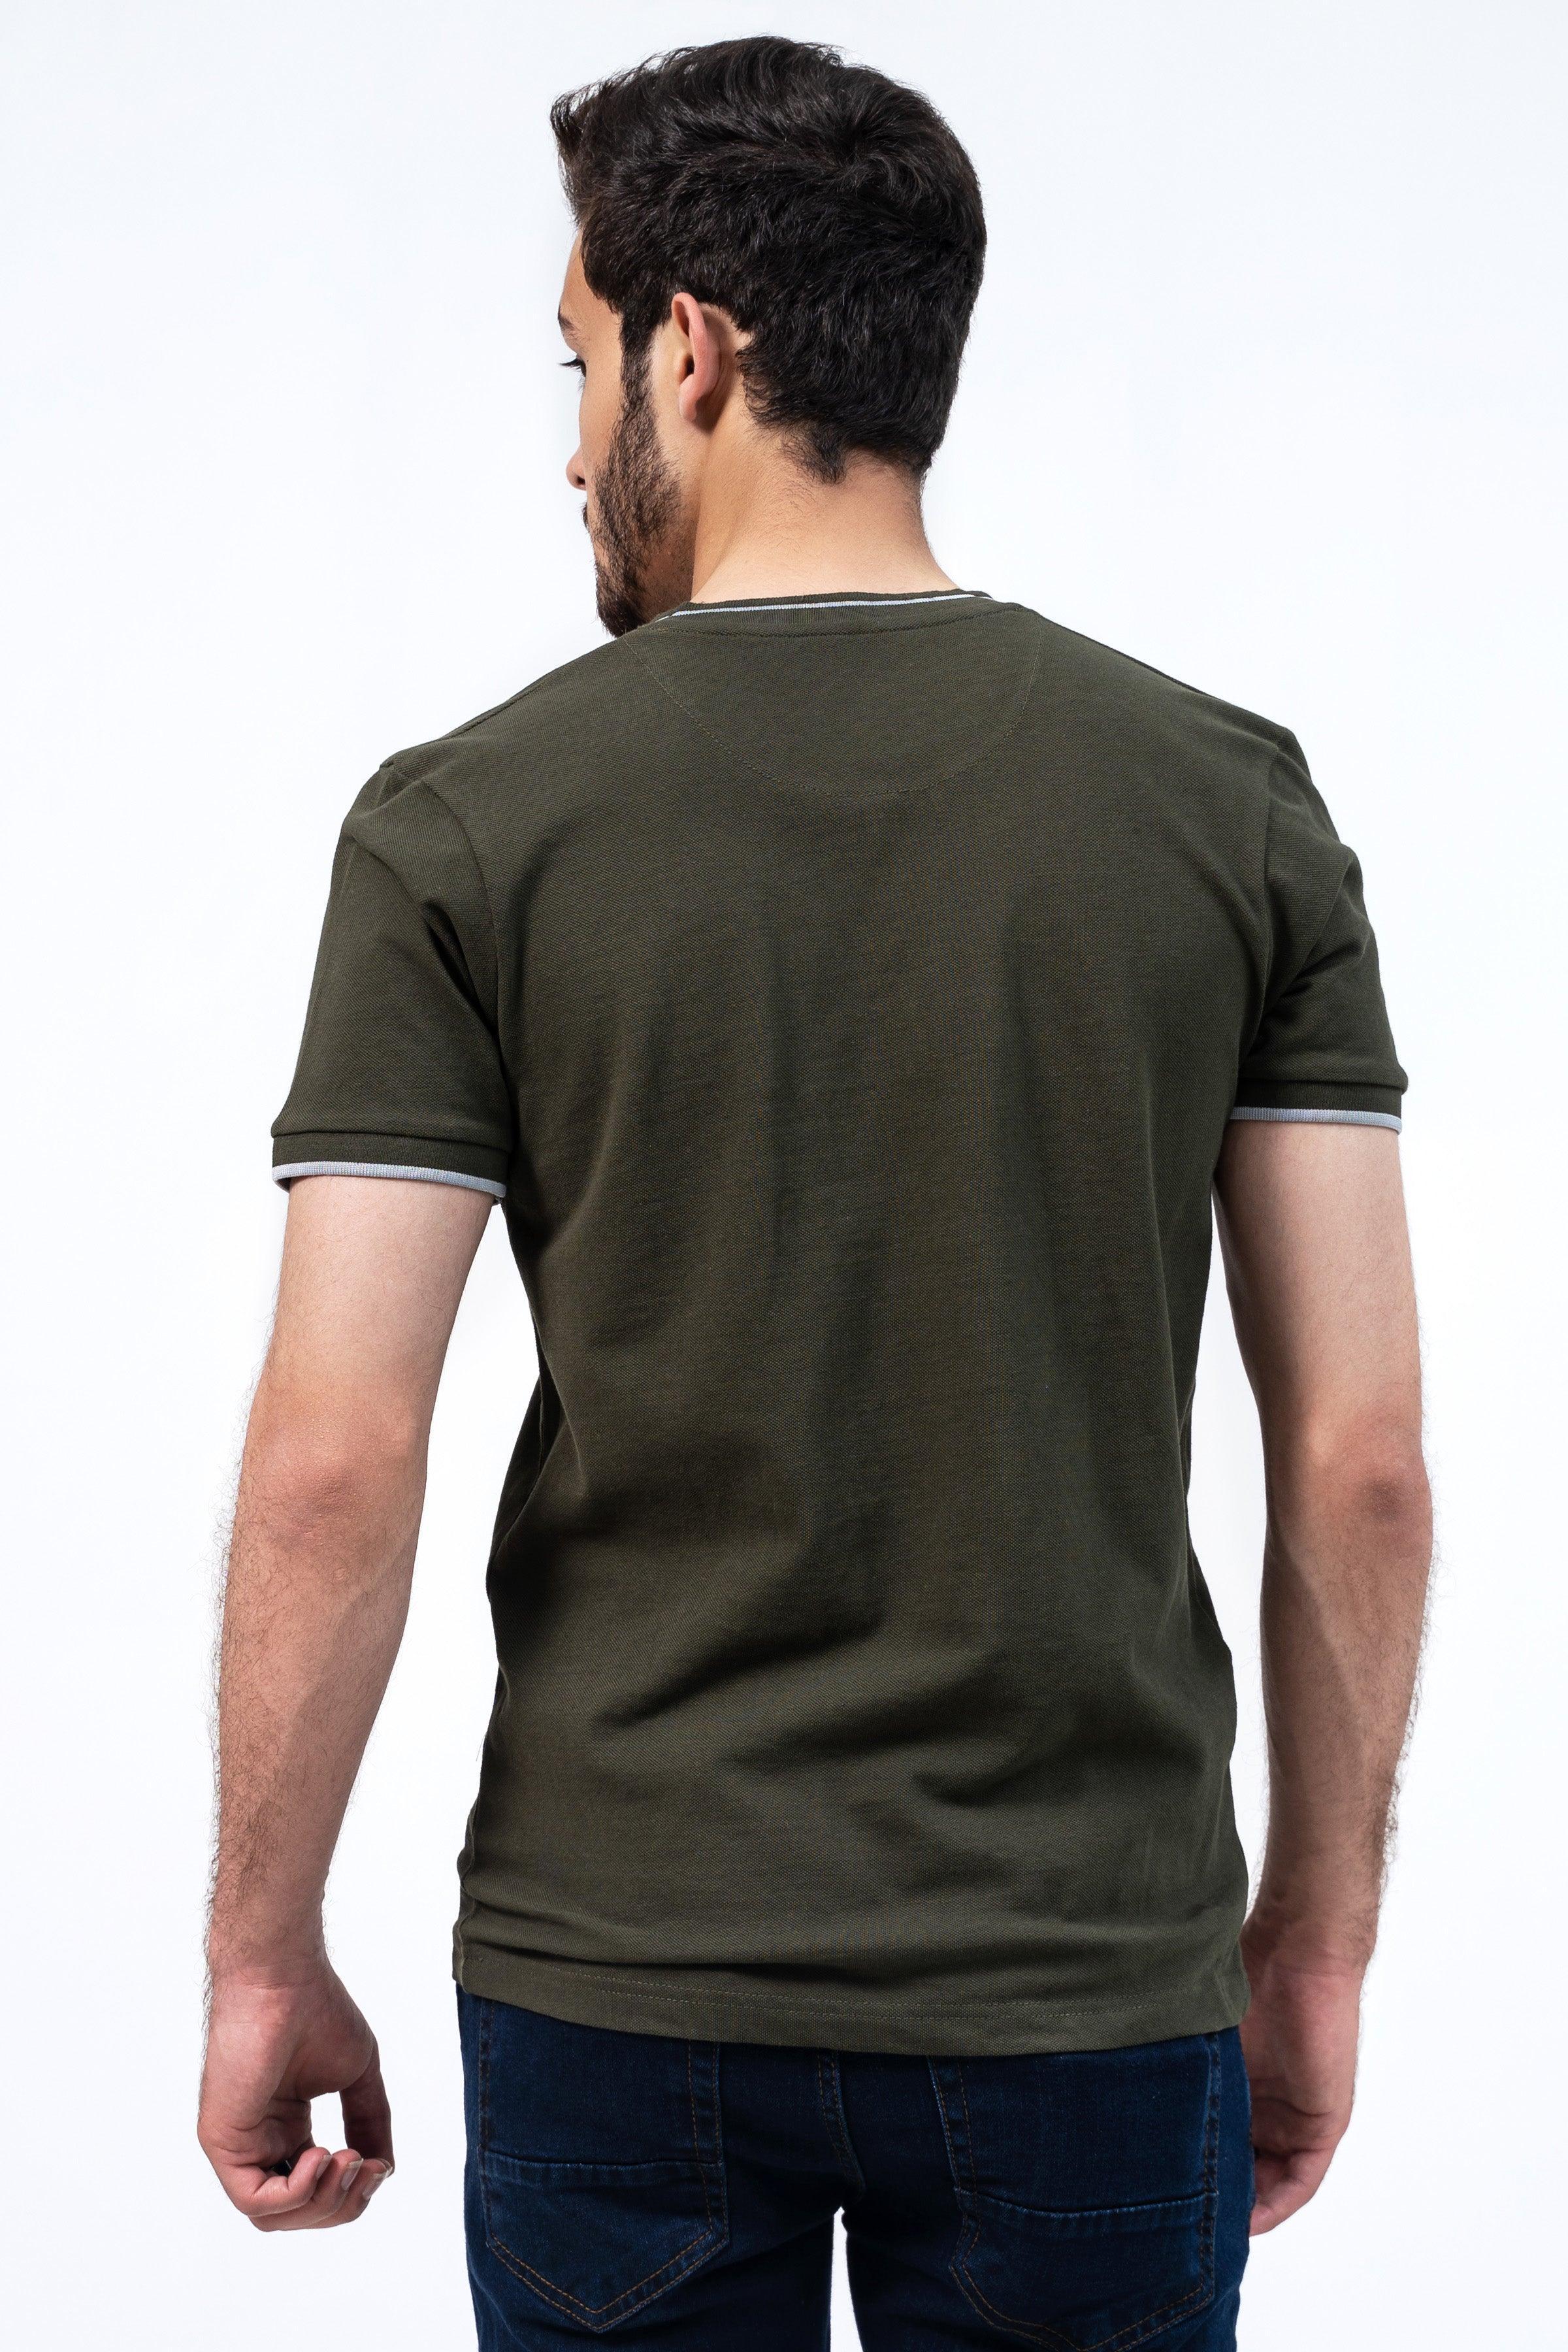 HENLEY T-SHIRT OLIVE GREEN at Charcoal Clothing